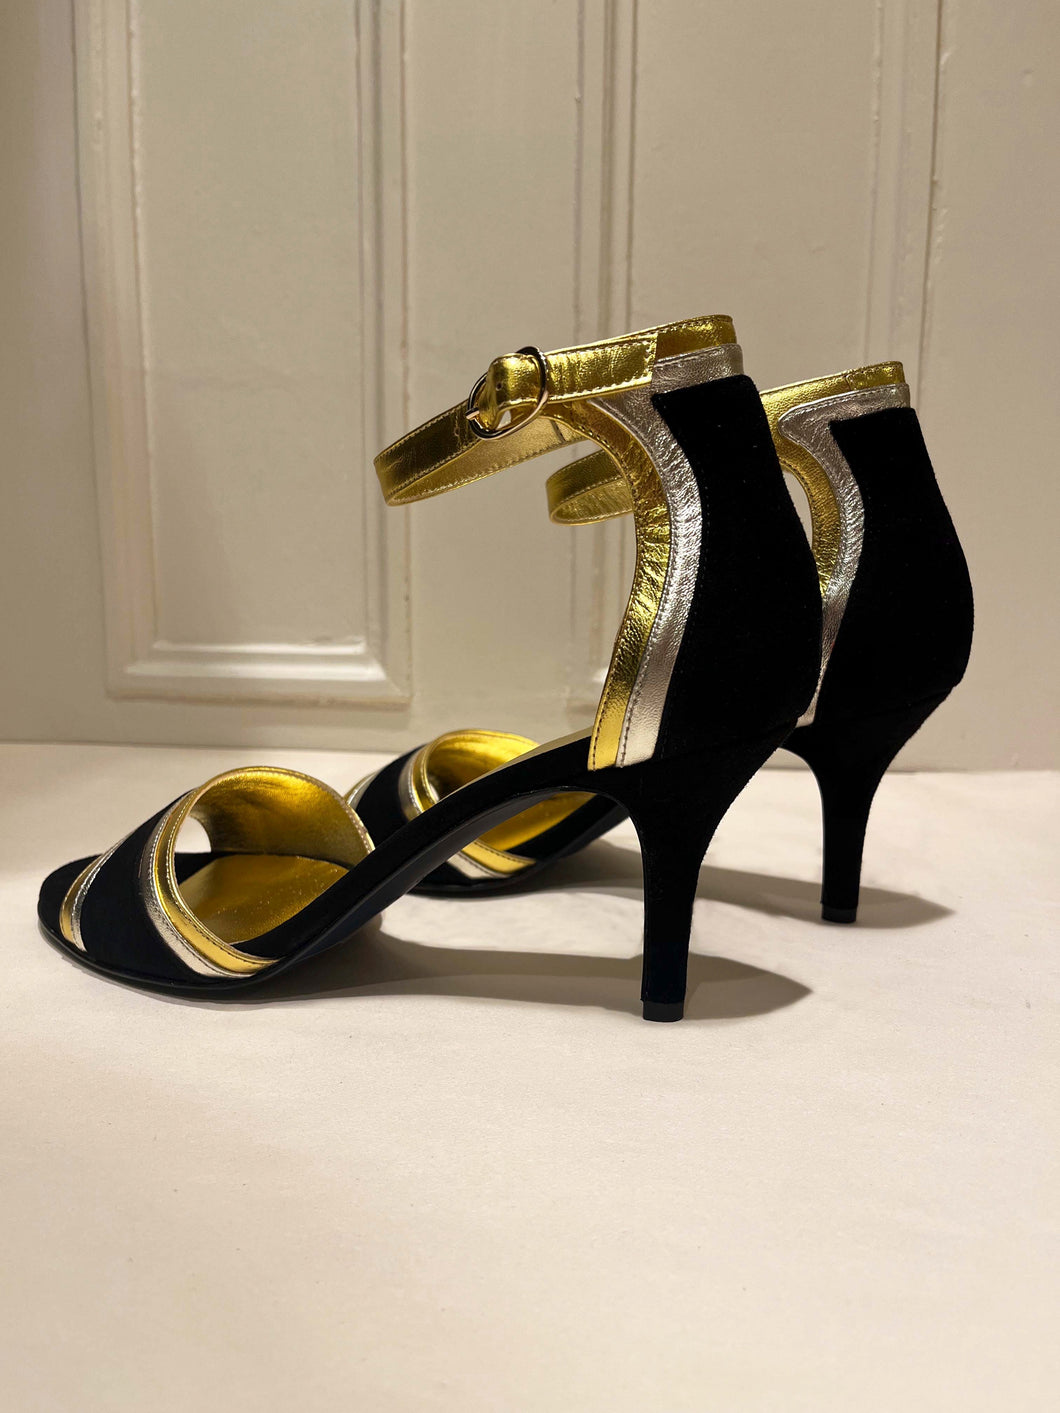 Maria-Lu black with gold/silver